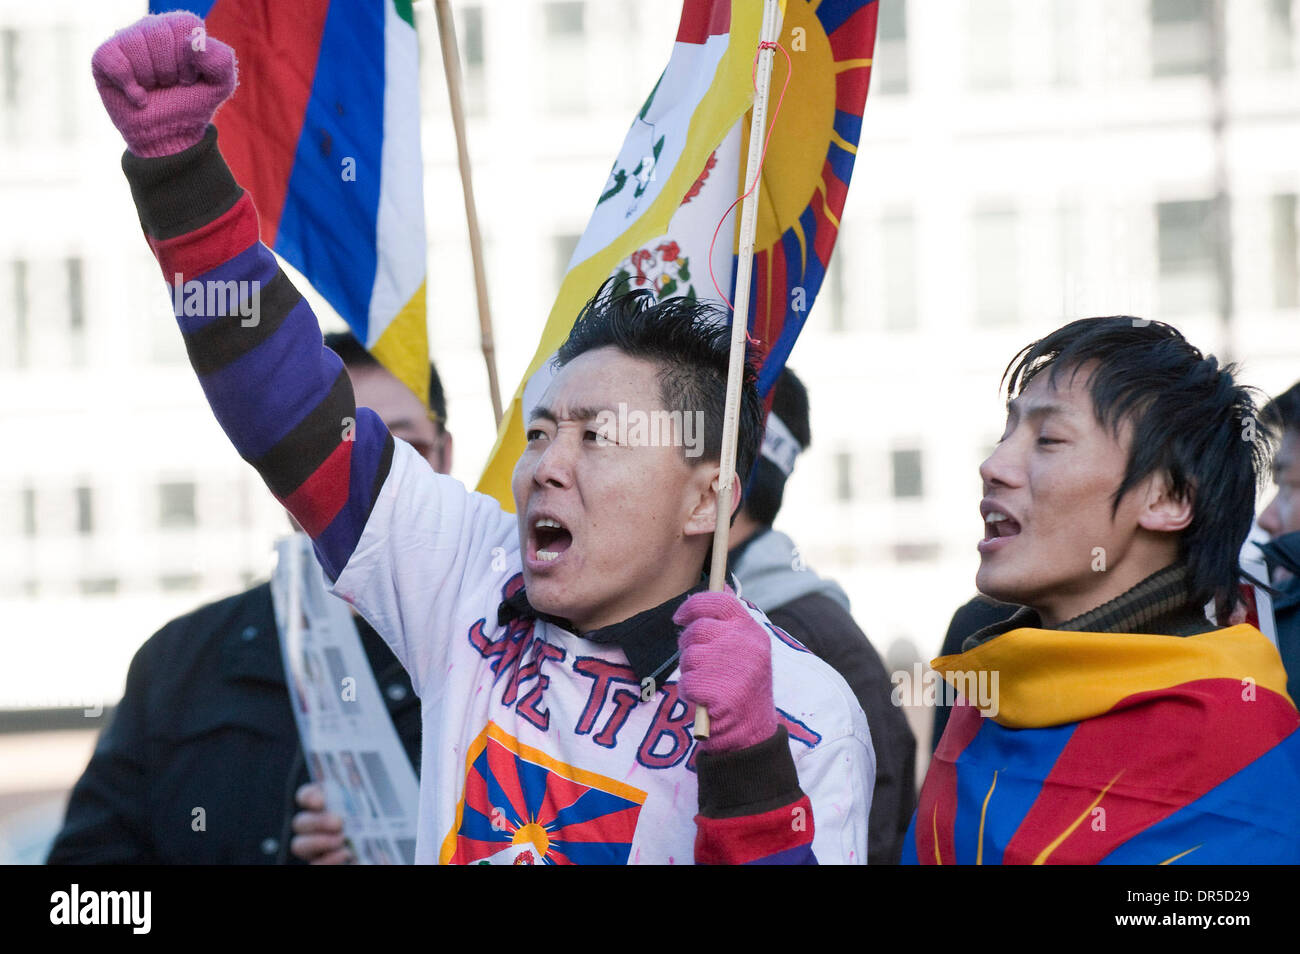 Jan 30, 2009 - Brussels, Belgium - Pro-Tibetan activisits demonstrate in front of the European commission headquarters during the visit of Chinese Premier Wen Jiabao in Brussels. (Credit Image: © Wiktor Dabkowski/ZUMA Press) Stock Photo